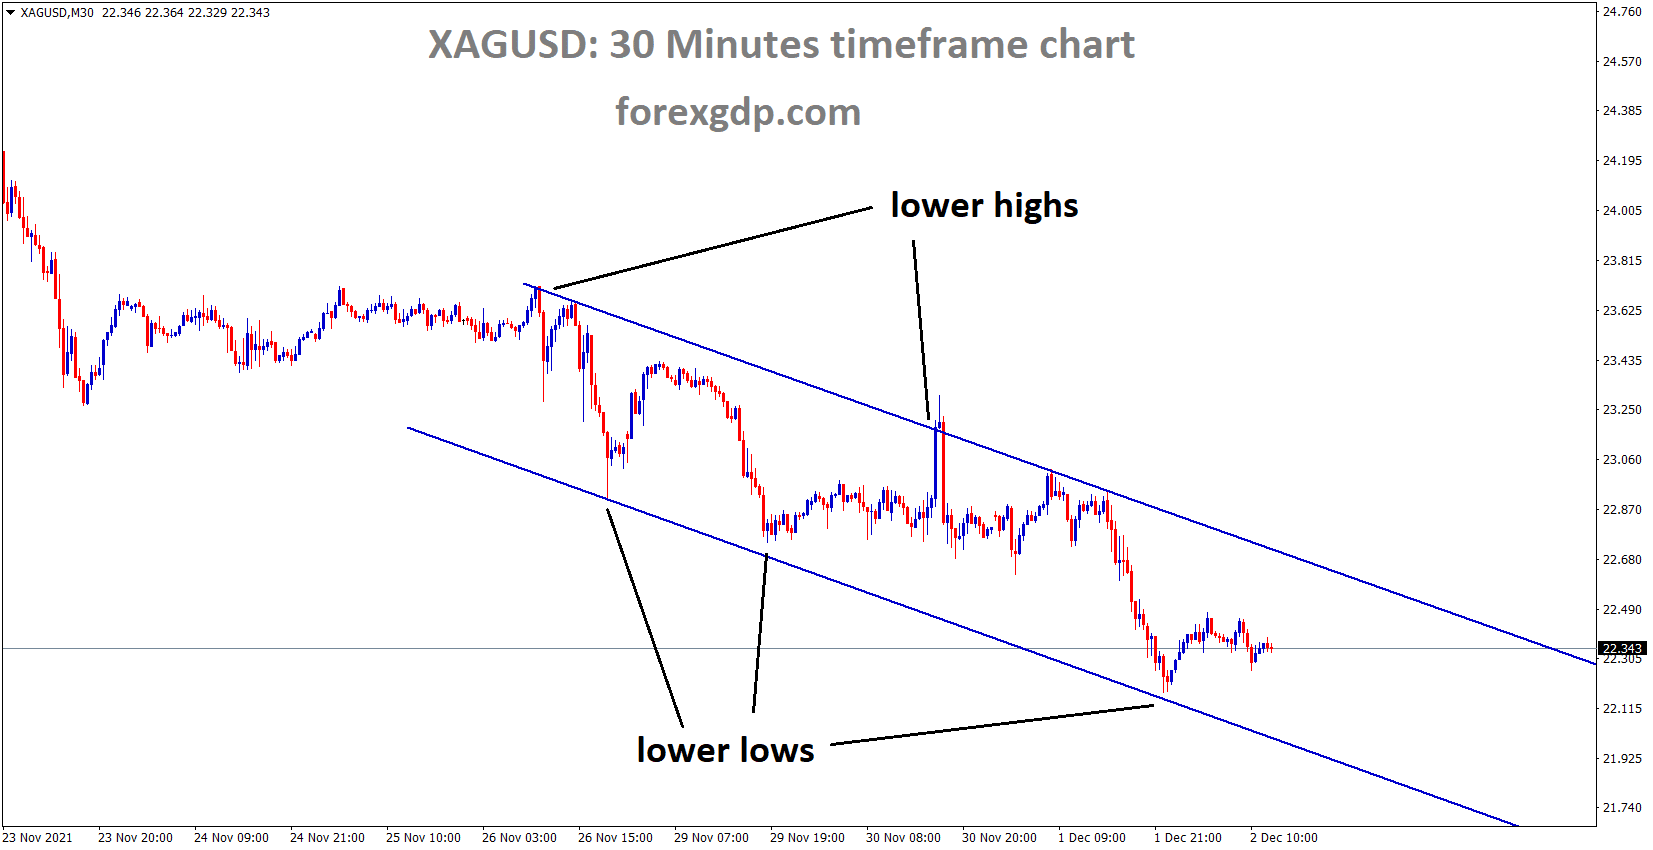 XAGUSD Silver price is moving in the Descending channel and market rebounding from the lower low area of the channel